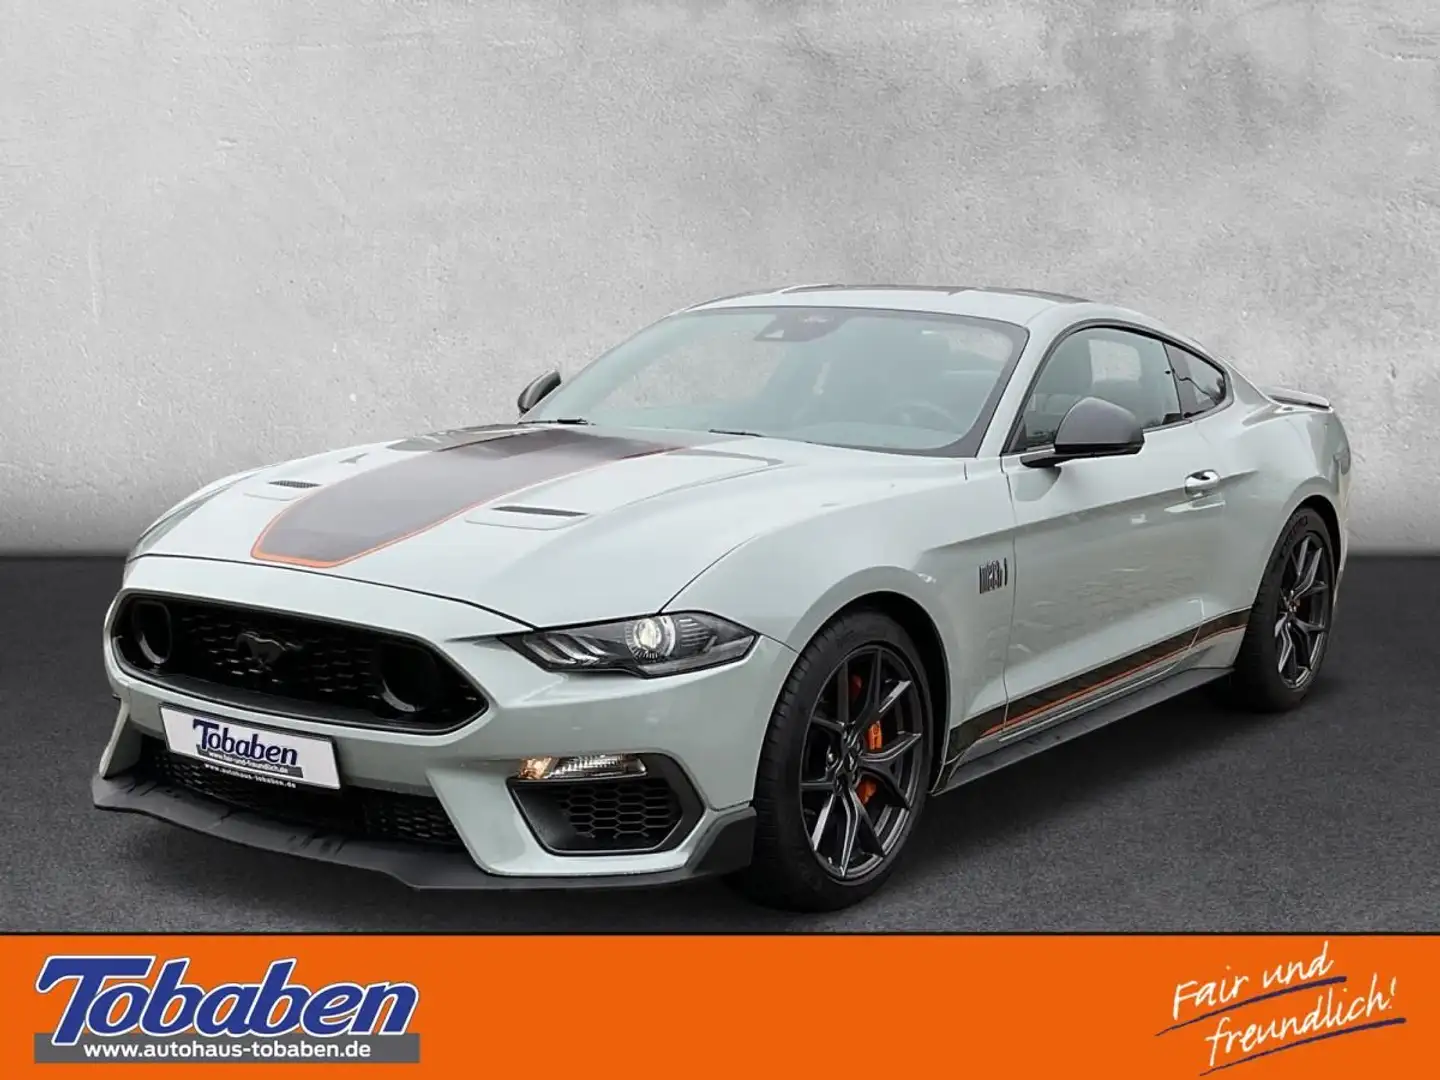 Ford Mustang MACH 1 5.0 Ti-VCT V8 338kW Auto Coupe, Grau - 1